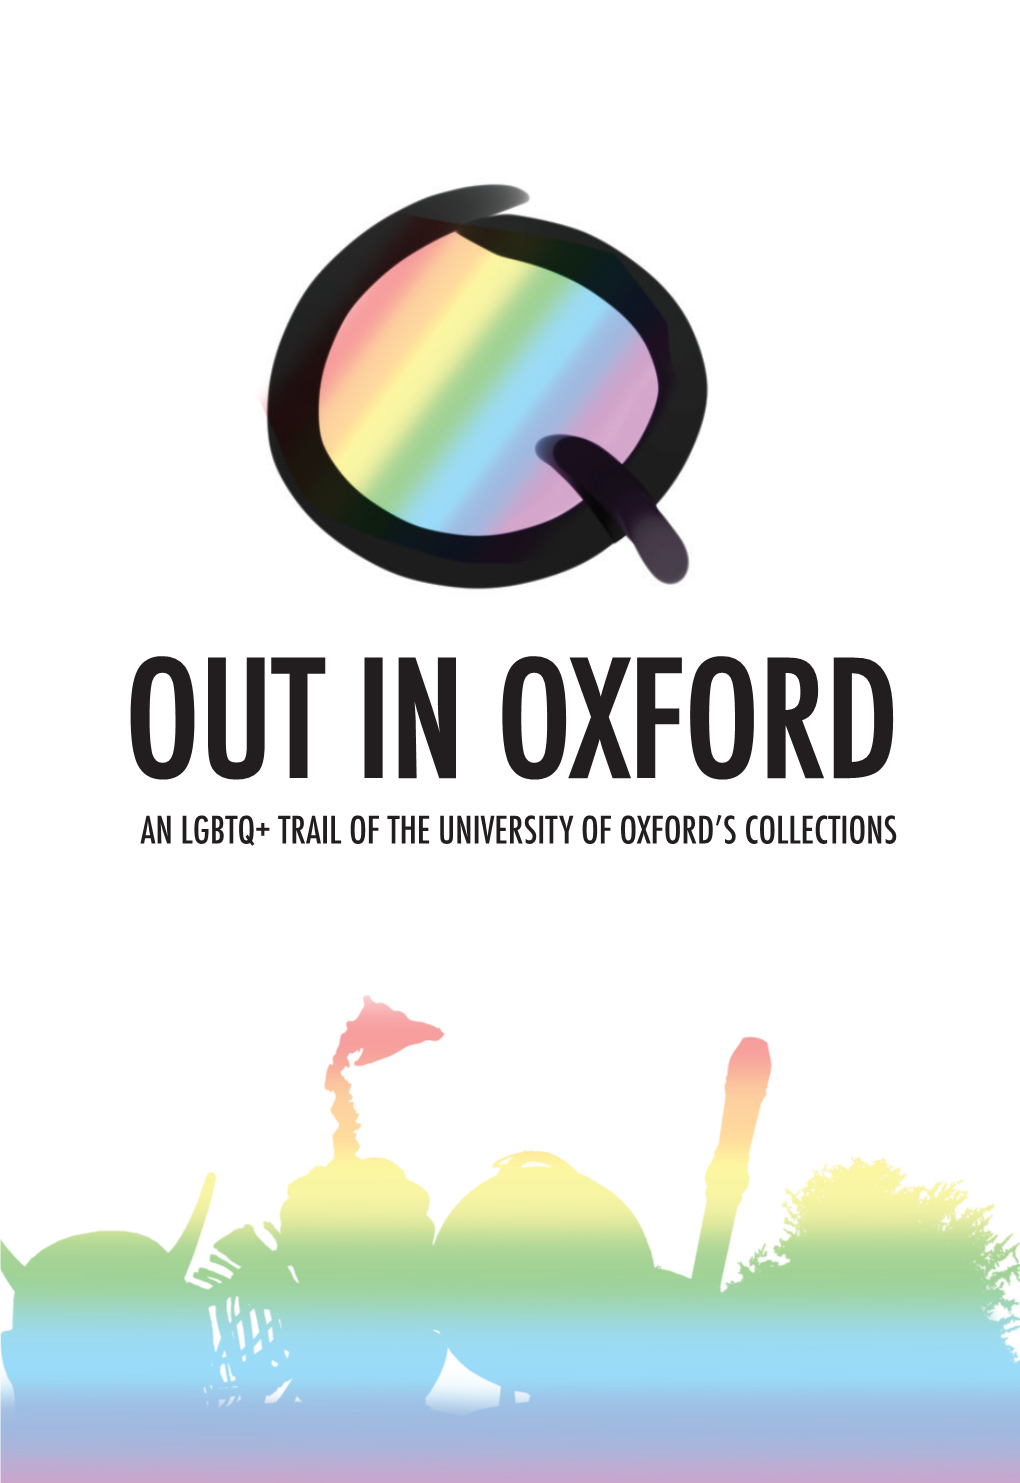 An Lgbtq+ Trail of the University of Oxford's